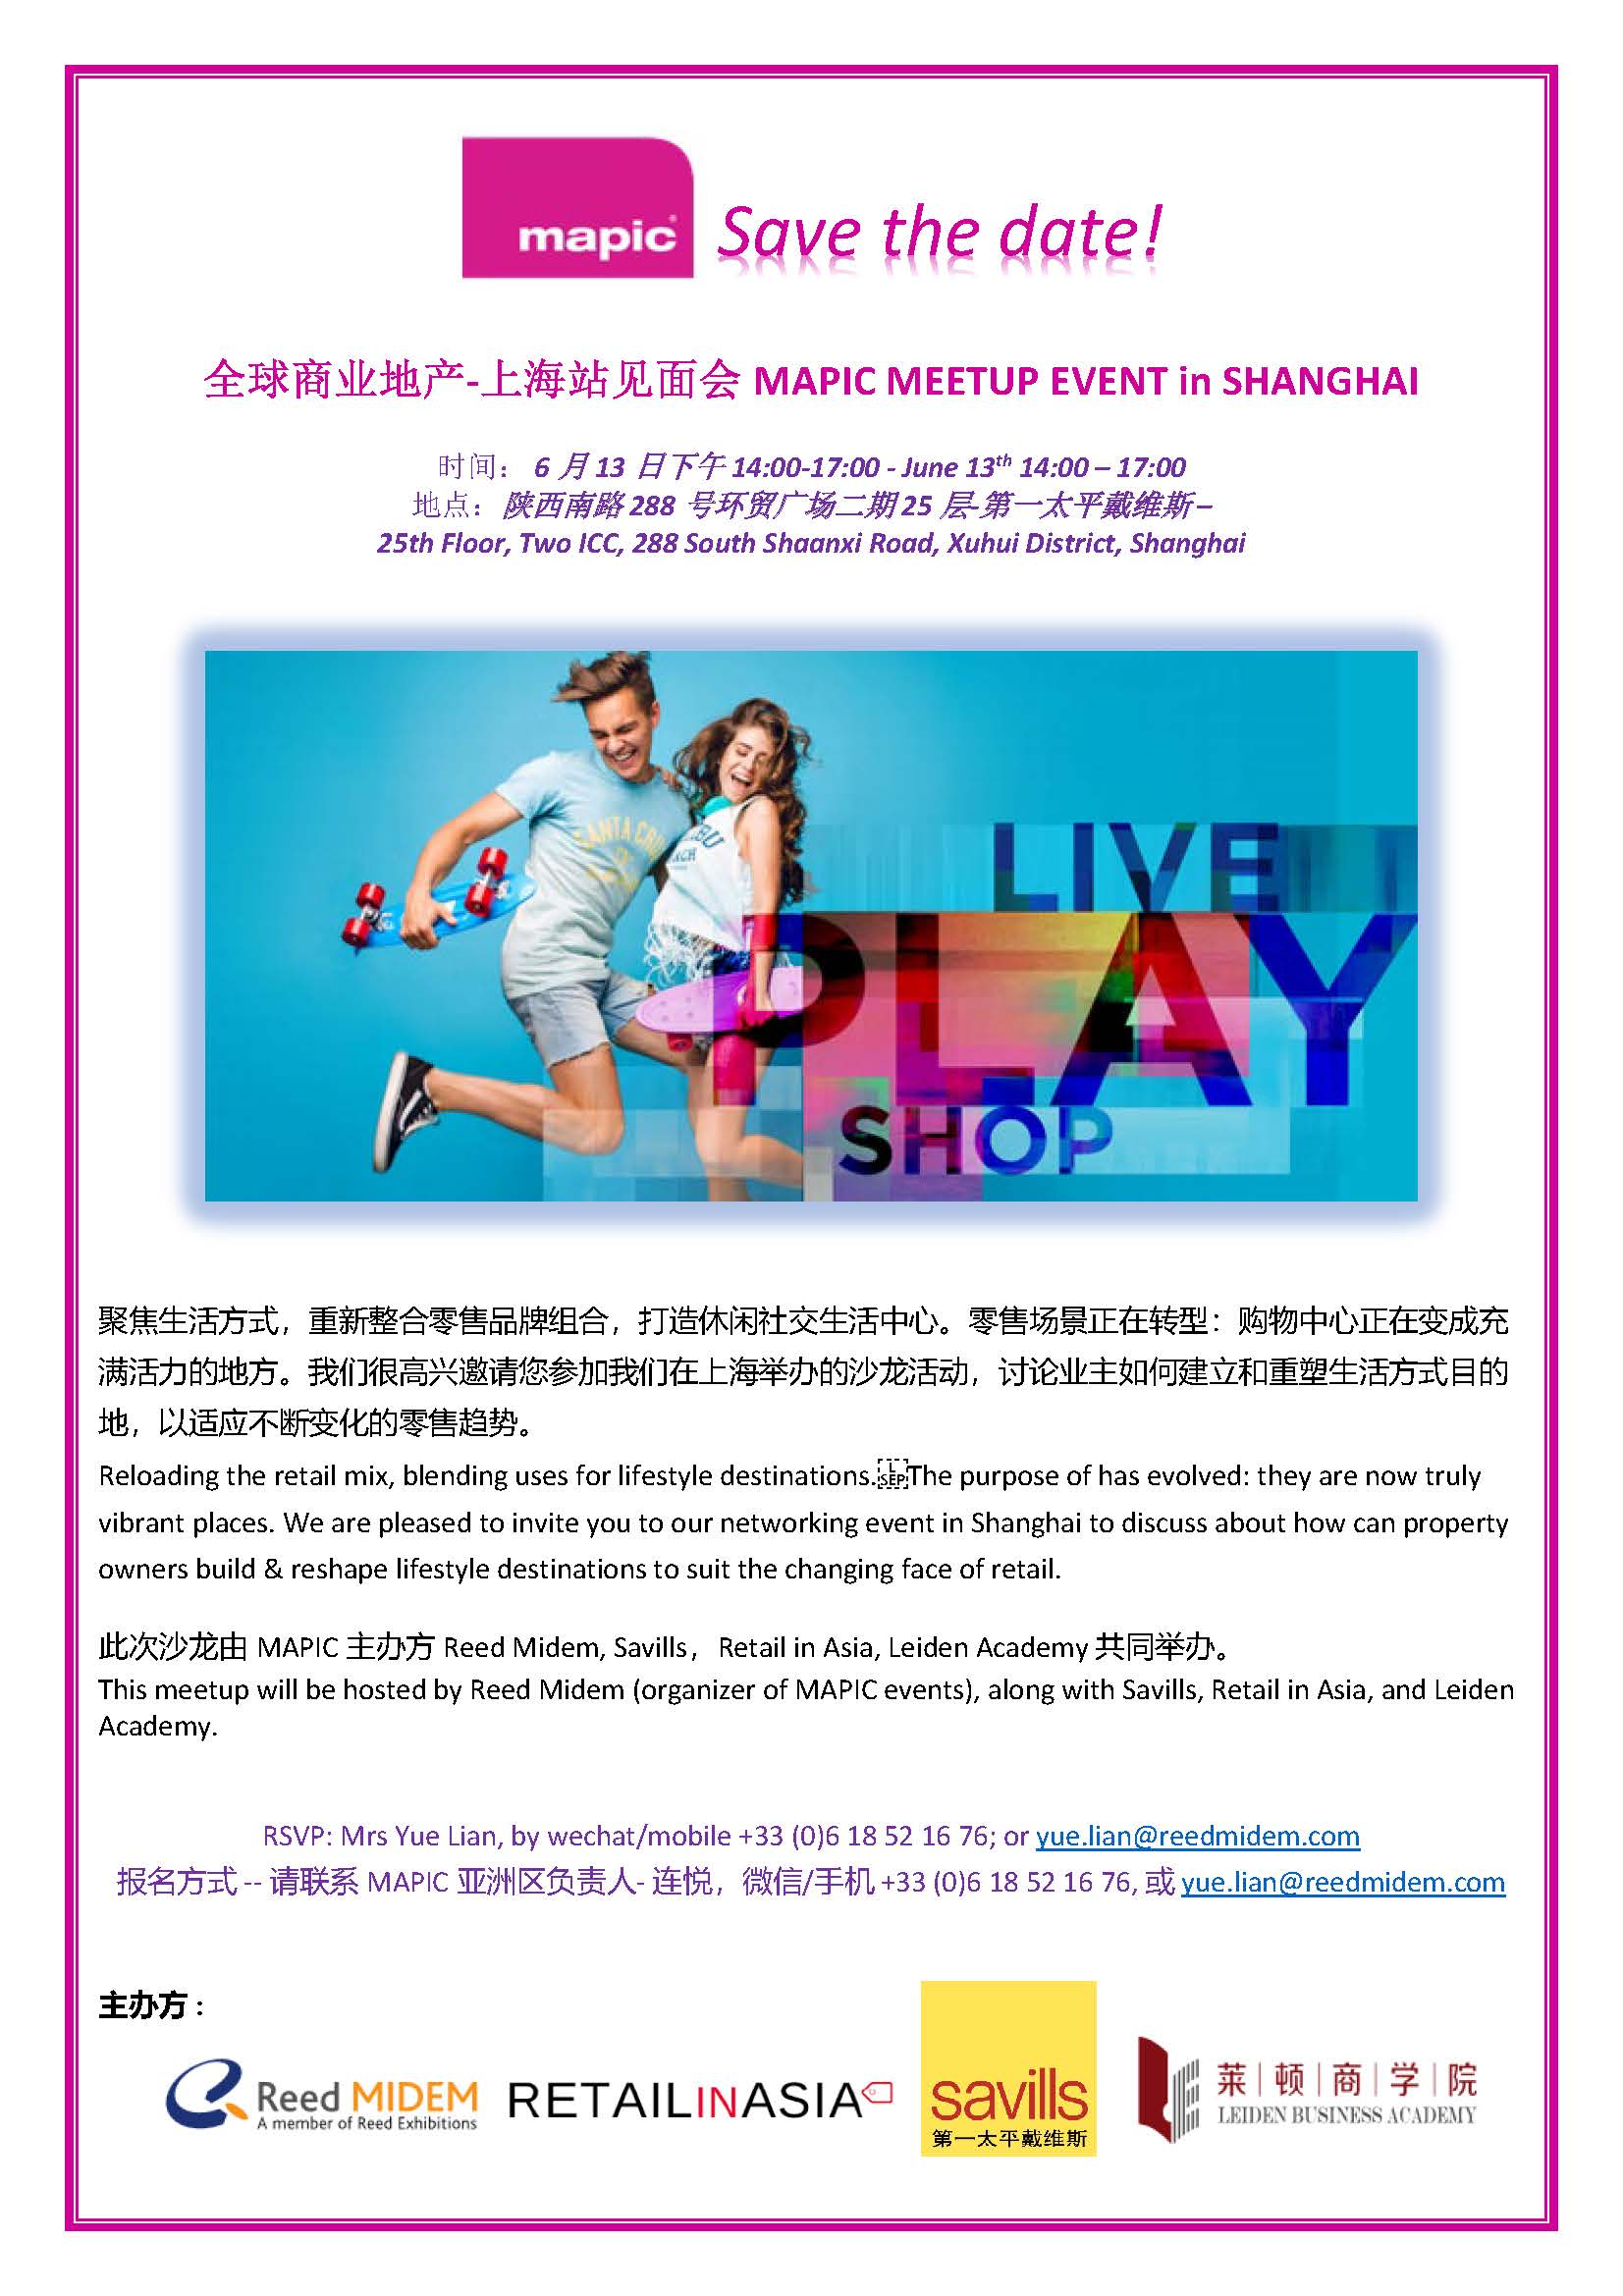 Save the date_MAPIC Shanghai Meetup_June 13th